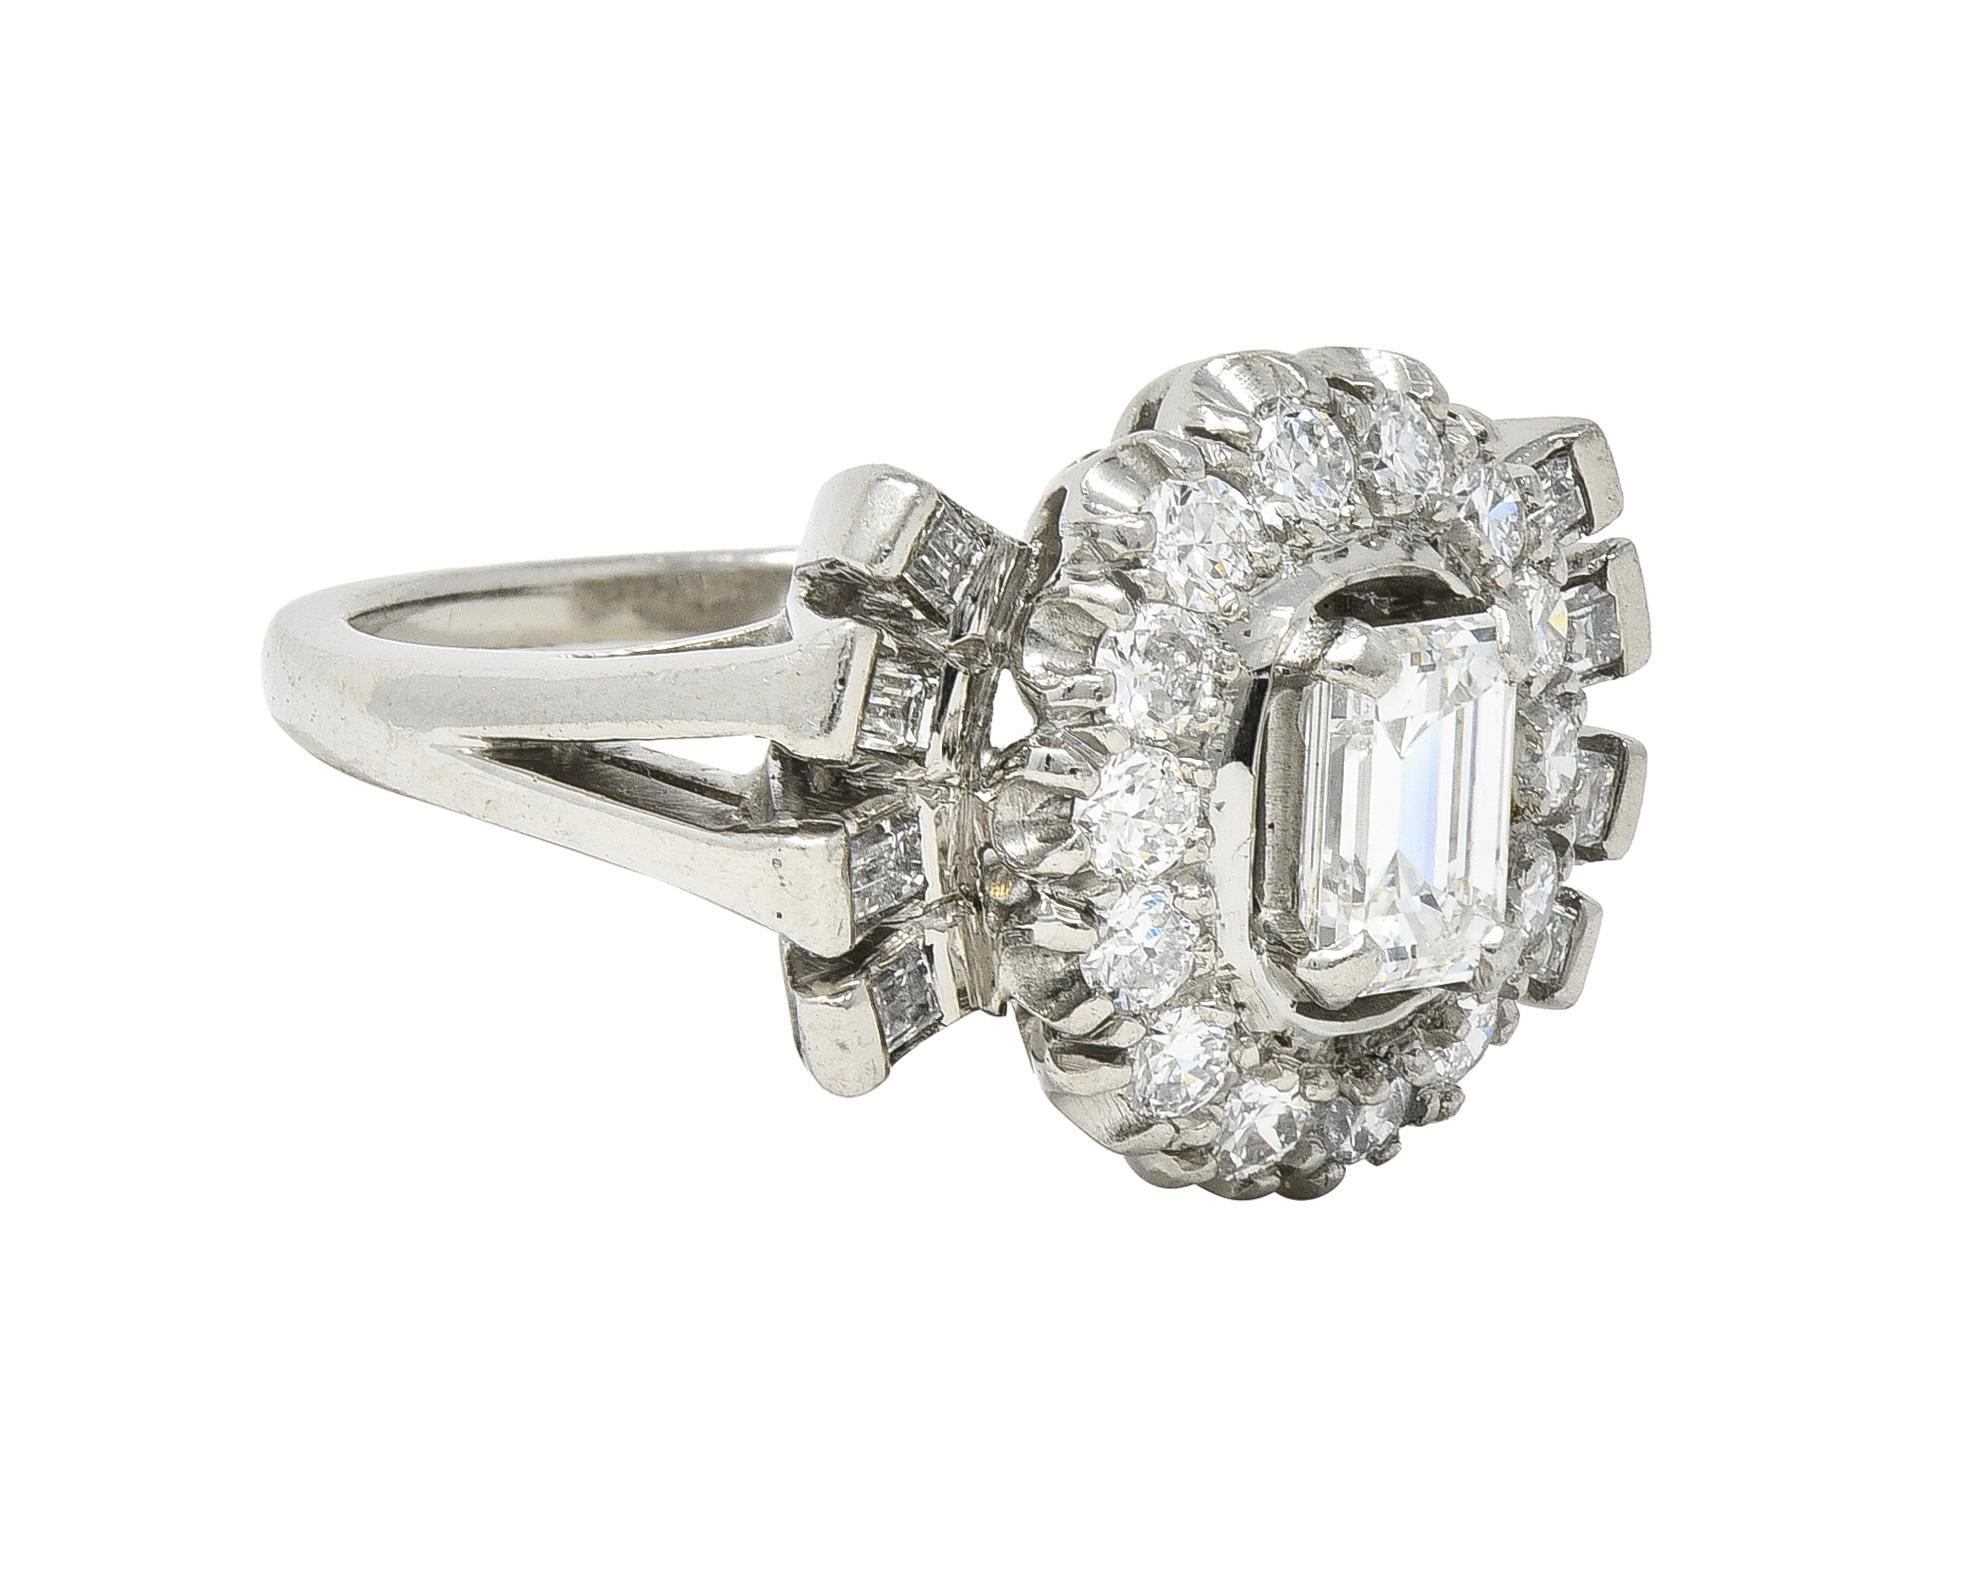 Centering an emerald cut diamond weighing approximately 0.63 carat - G color with VS2 clarity 
Set with wide prongs with a pierced floating halo surround of transitional cut diamonds
Weighing approximately 0.49 carat total - prong set in a wire